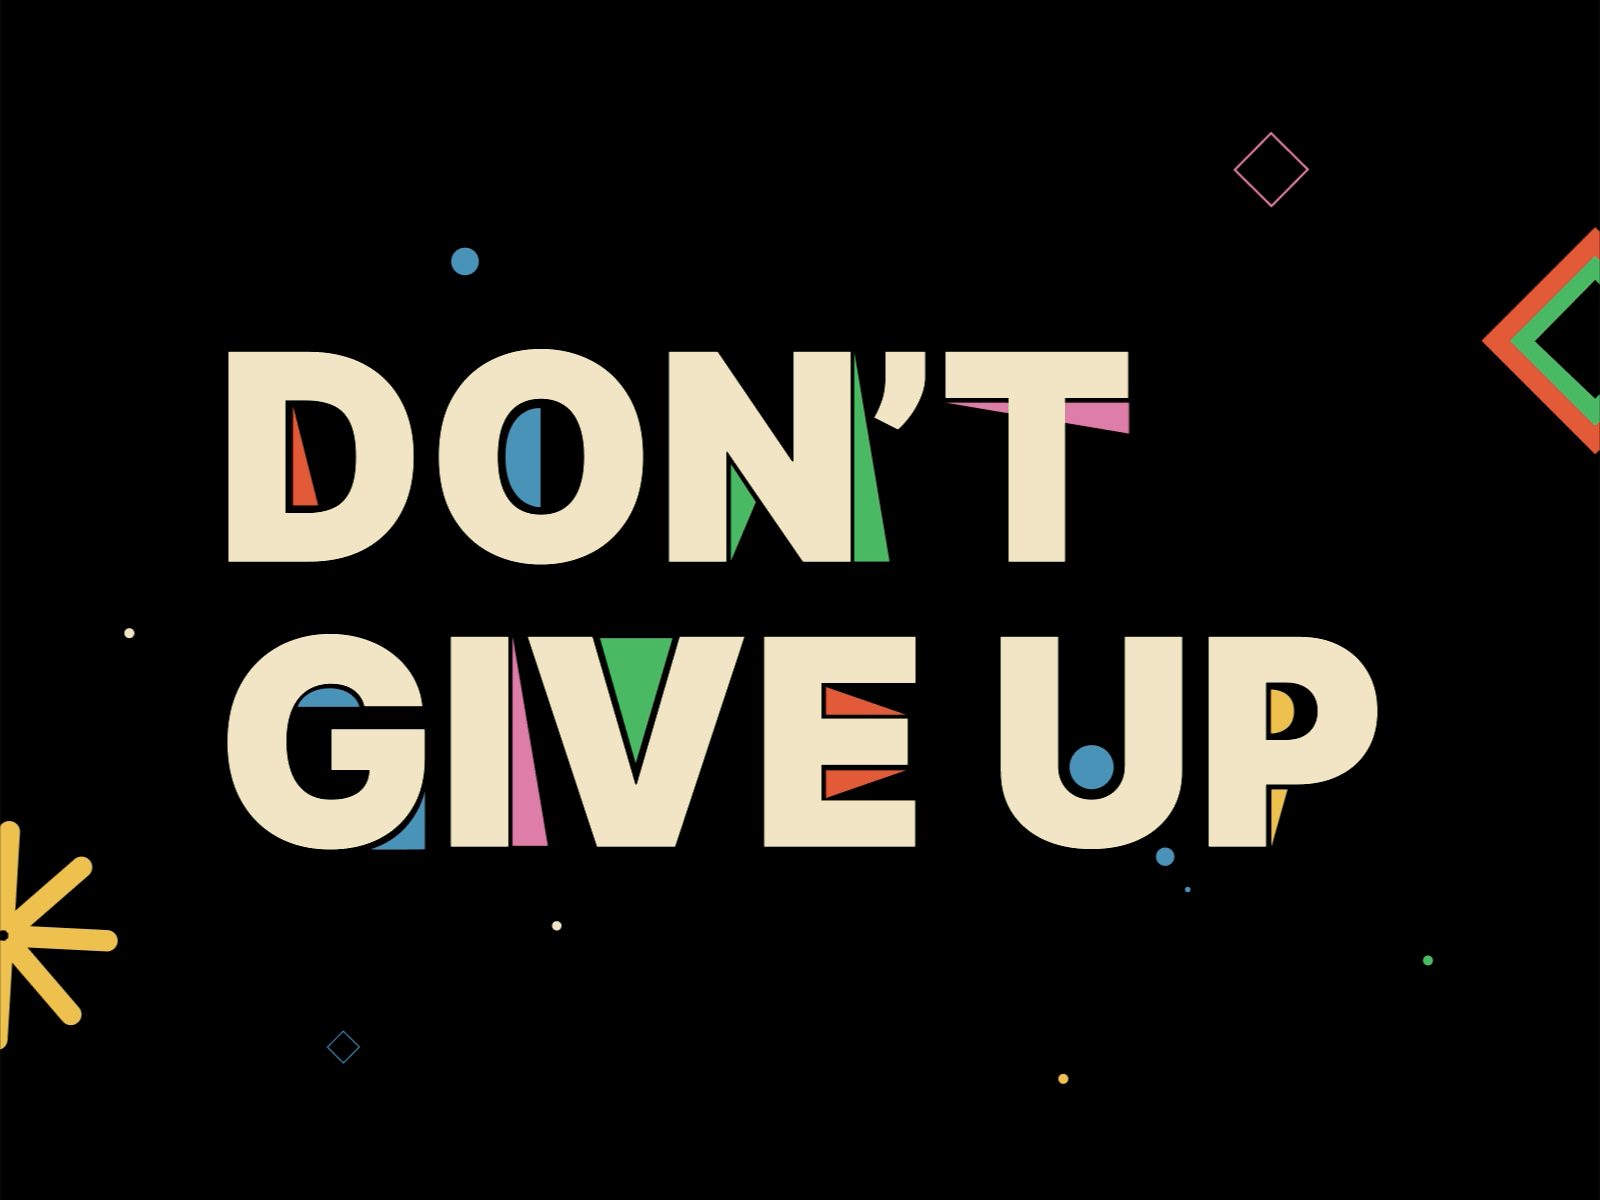 Don't give up animation art art direction artwork branding design graphic design illustration inspiration morph motion motion graphics product project shapes snappy tight type typography vector